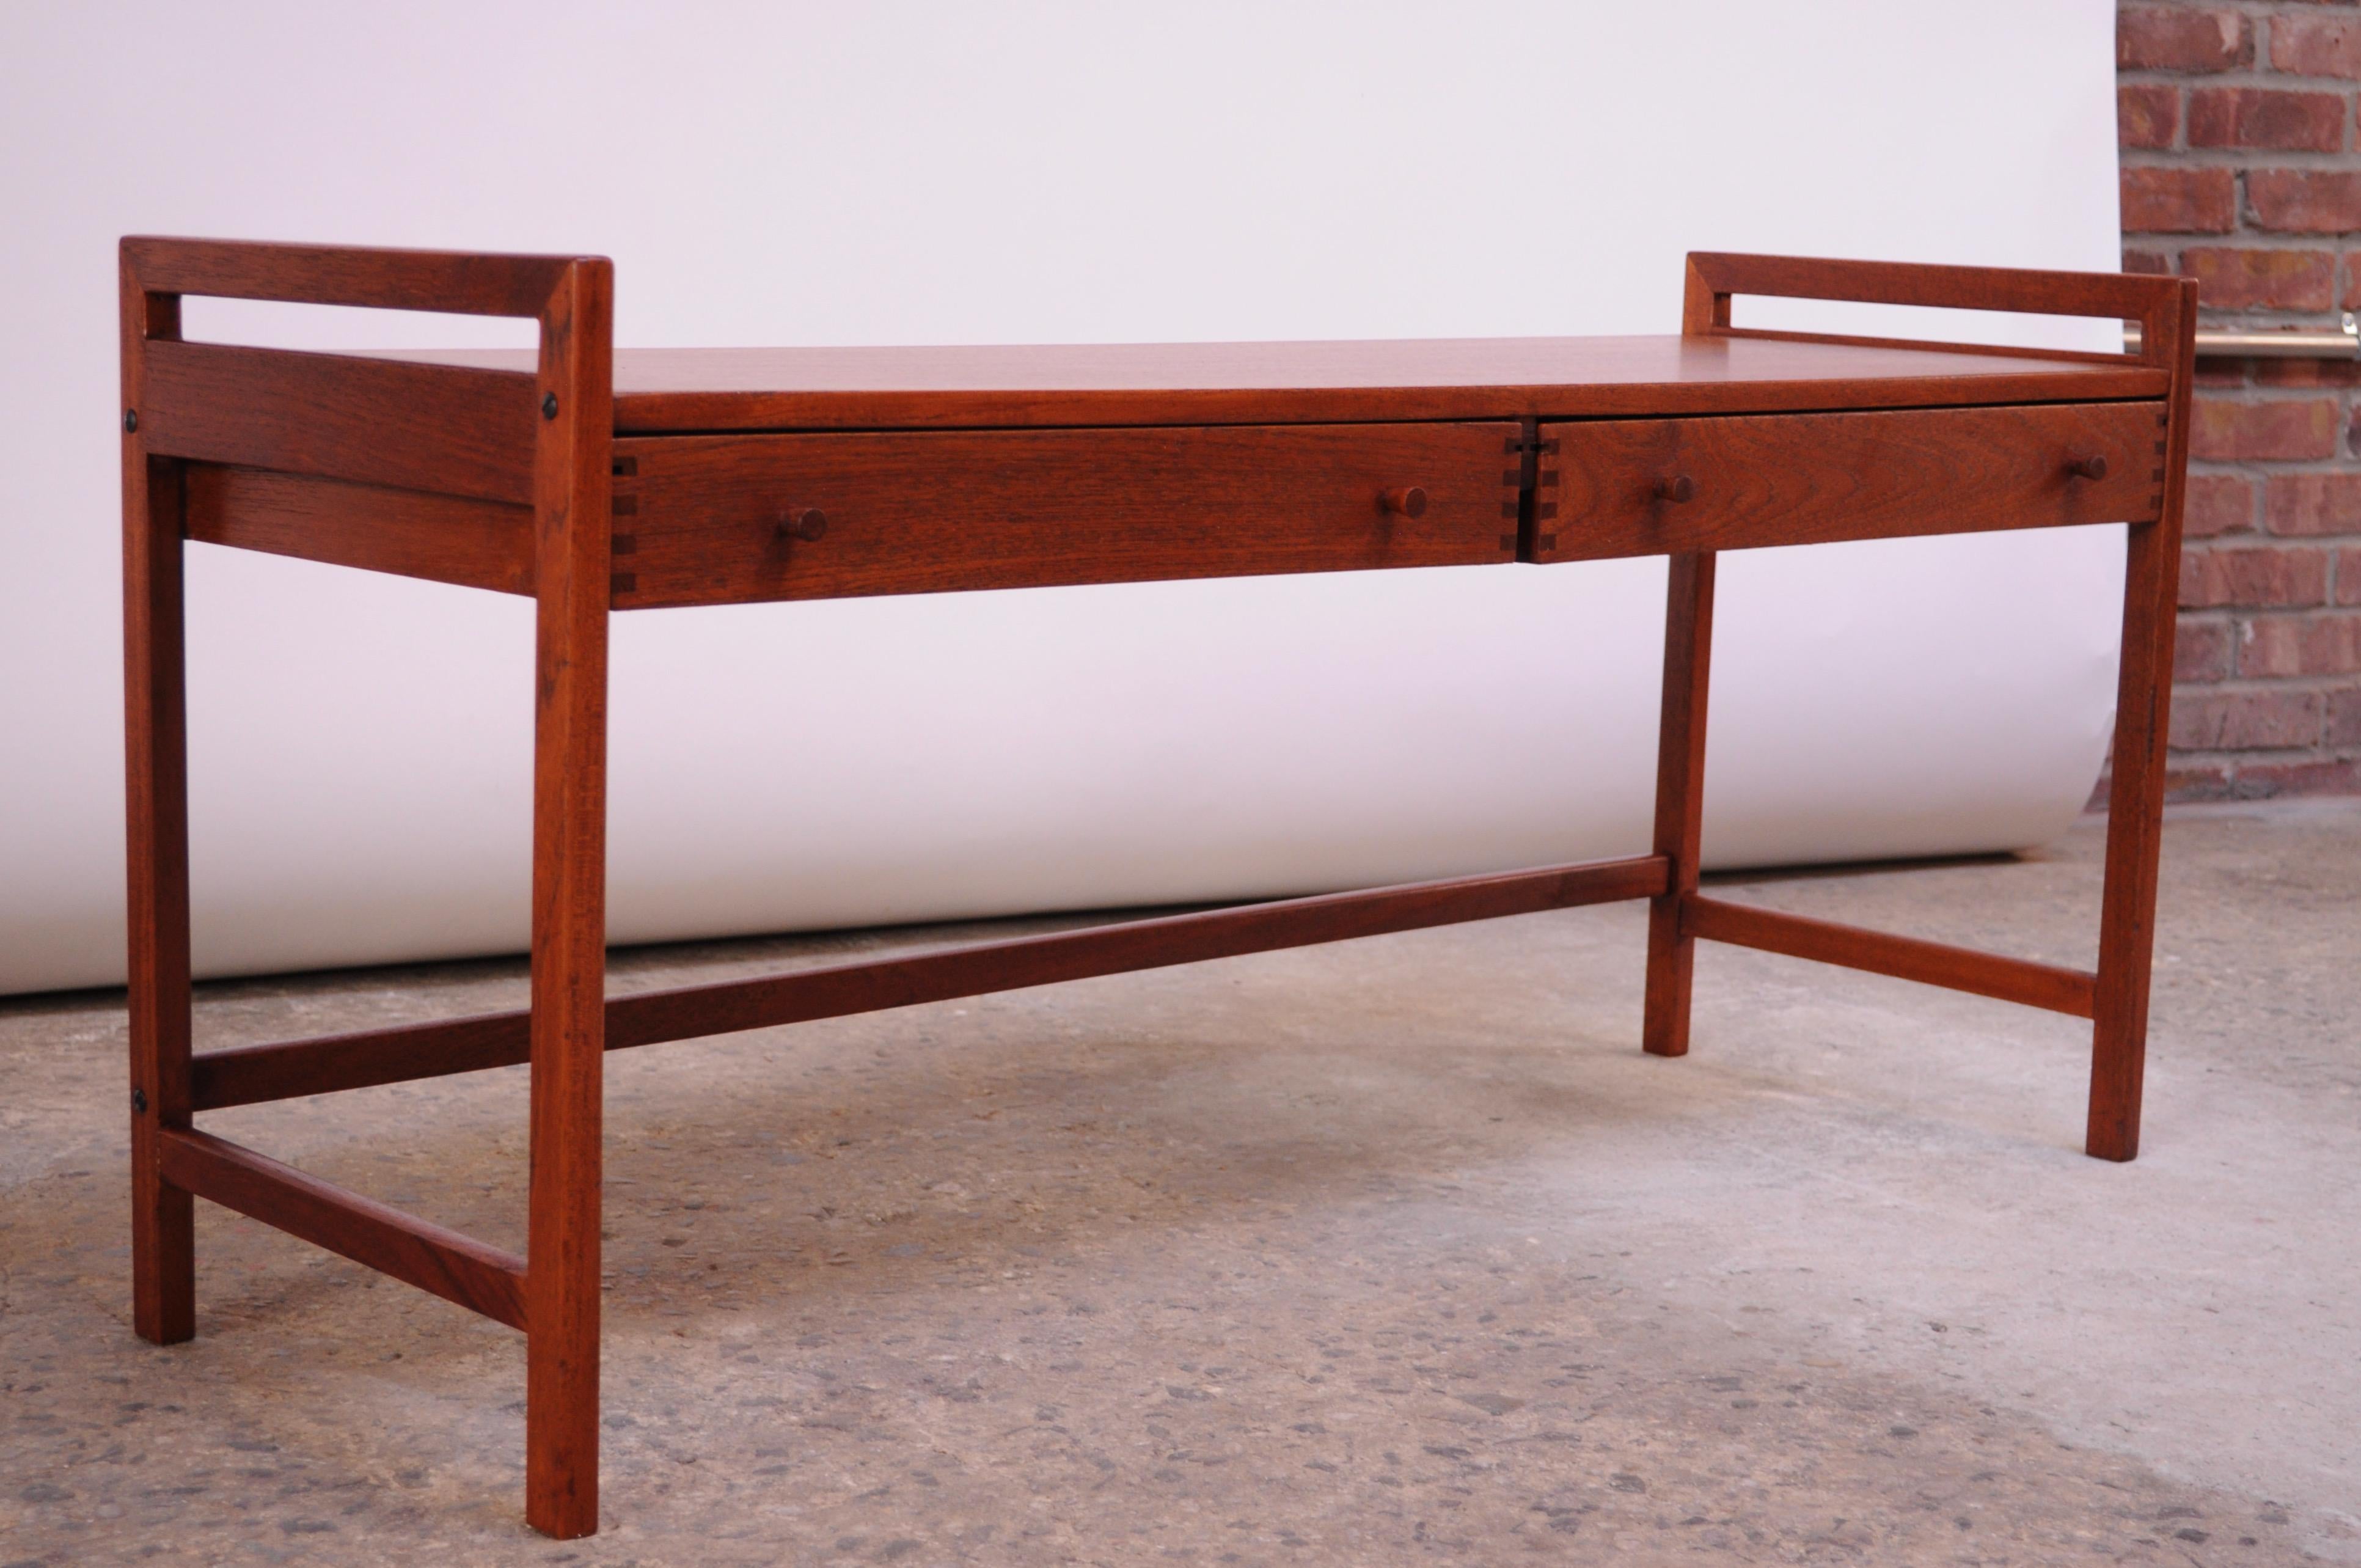 1960s Danish teak media stand, ideal for a turntable / stereo or tv with two shallow drawers for storing accessories. 
Quality, dovetail details present along with sculptural drawers pulls. 
Measures: H: 19